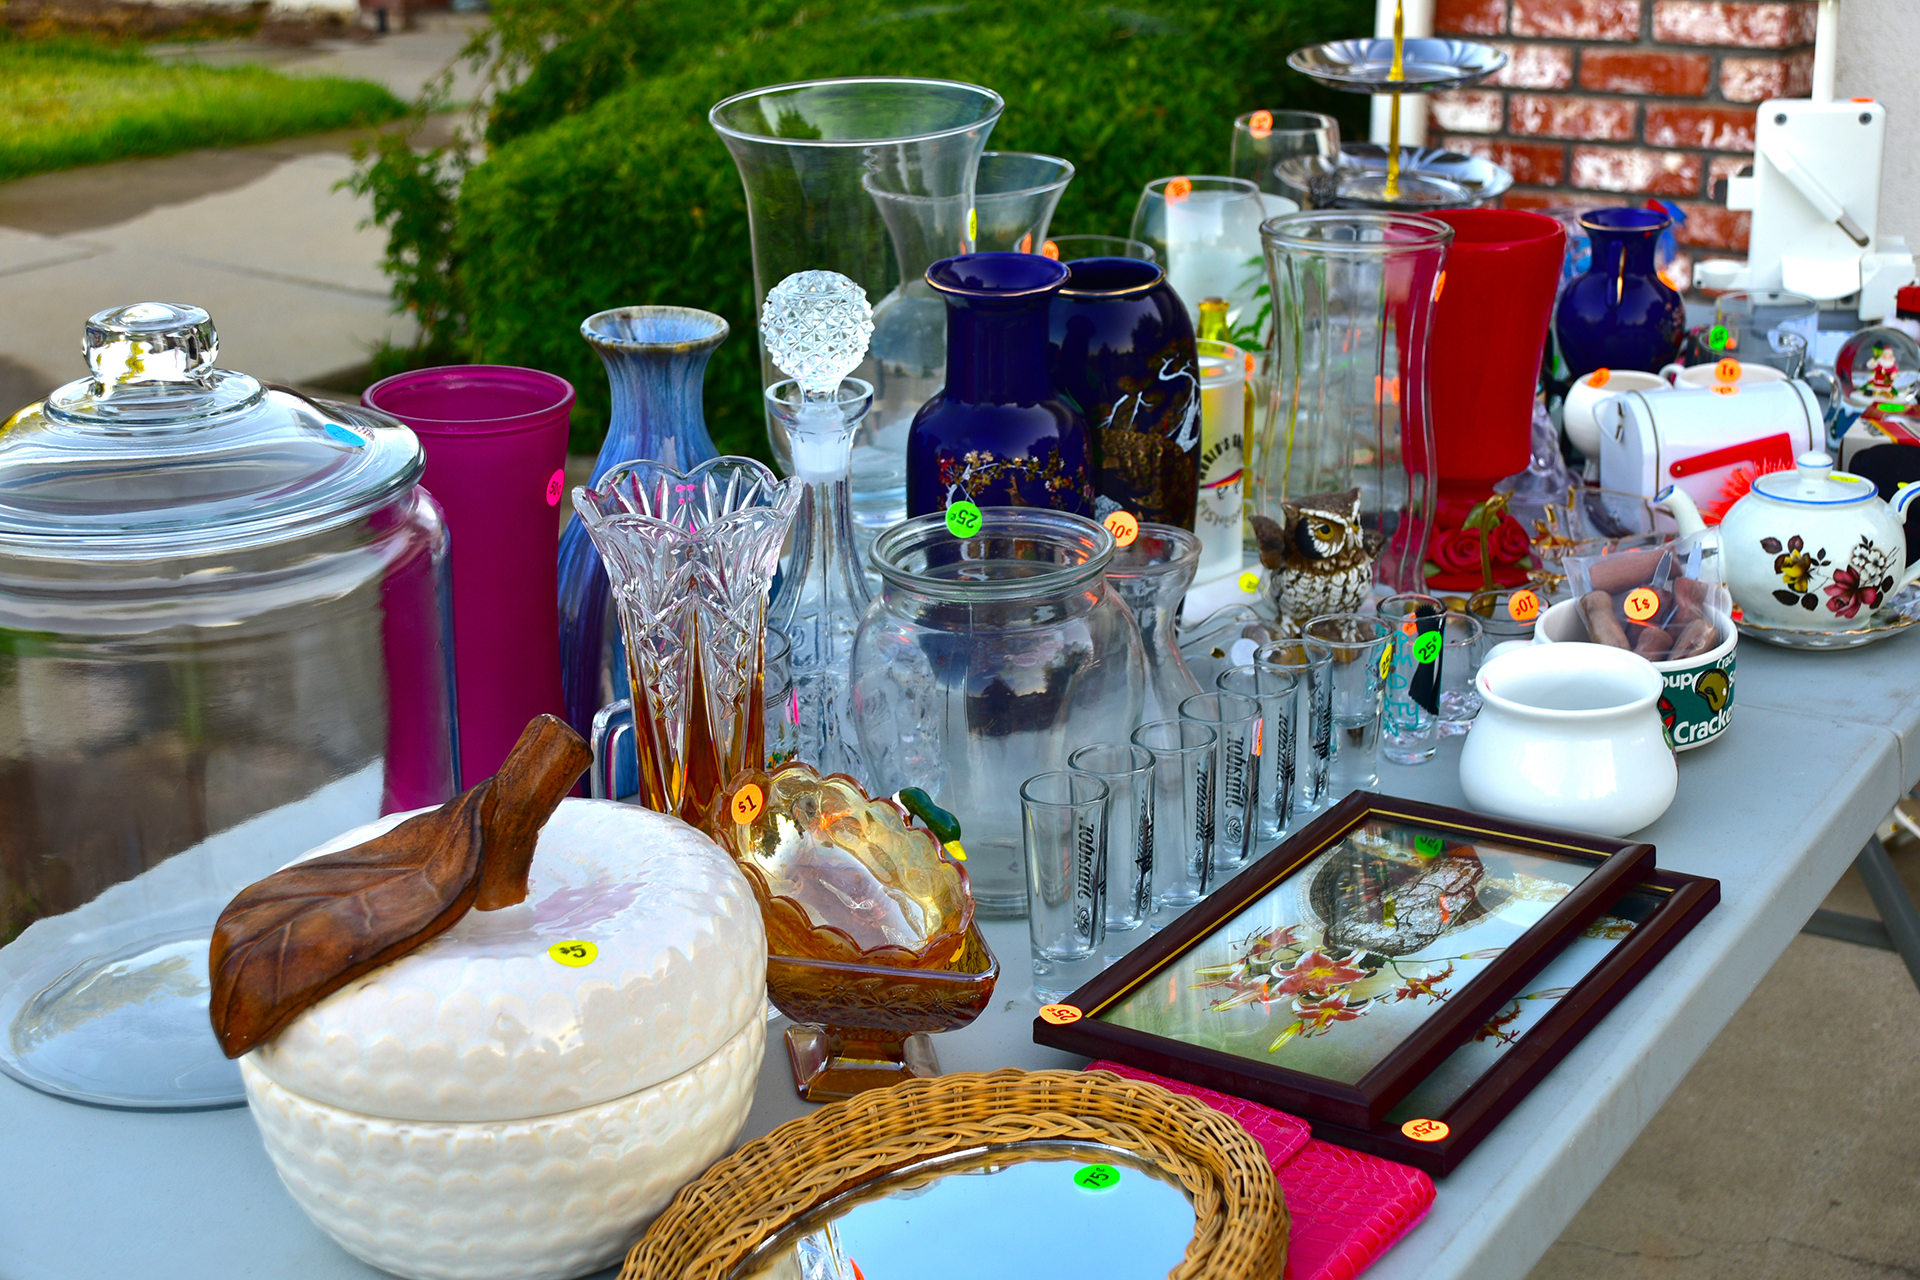 Garage sale with items priced and displayed on a table